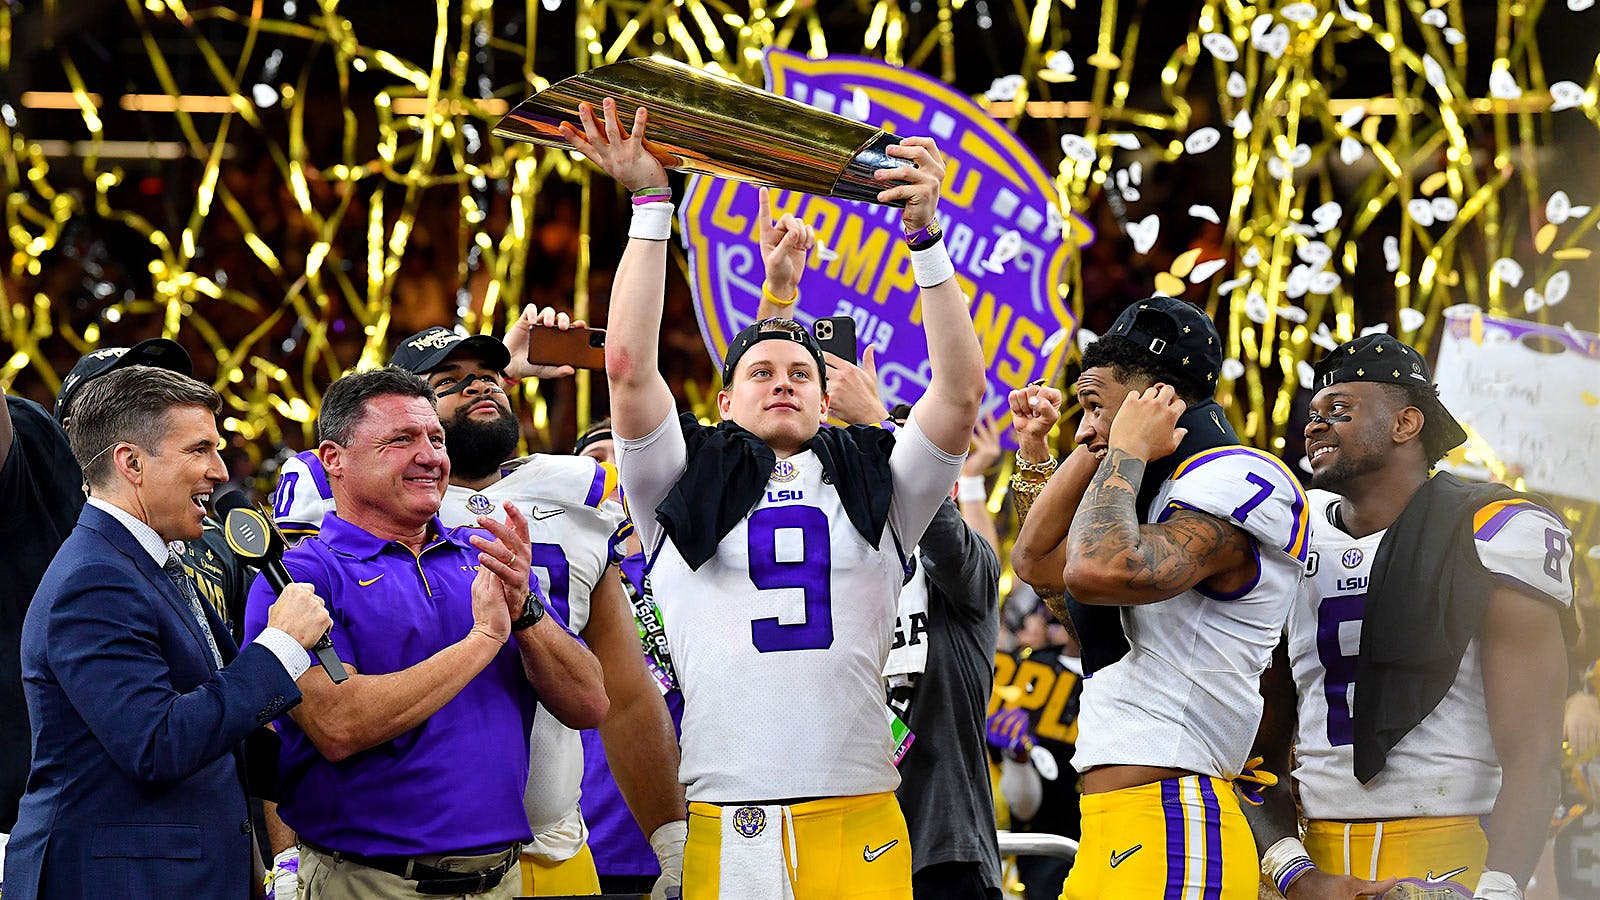 LSU Football Celebrates Championship With Cigars Despite Cops Trying to